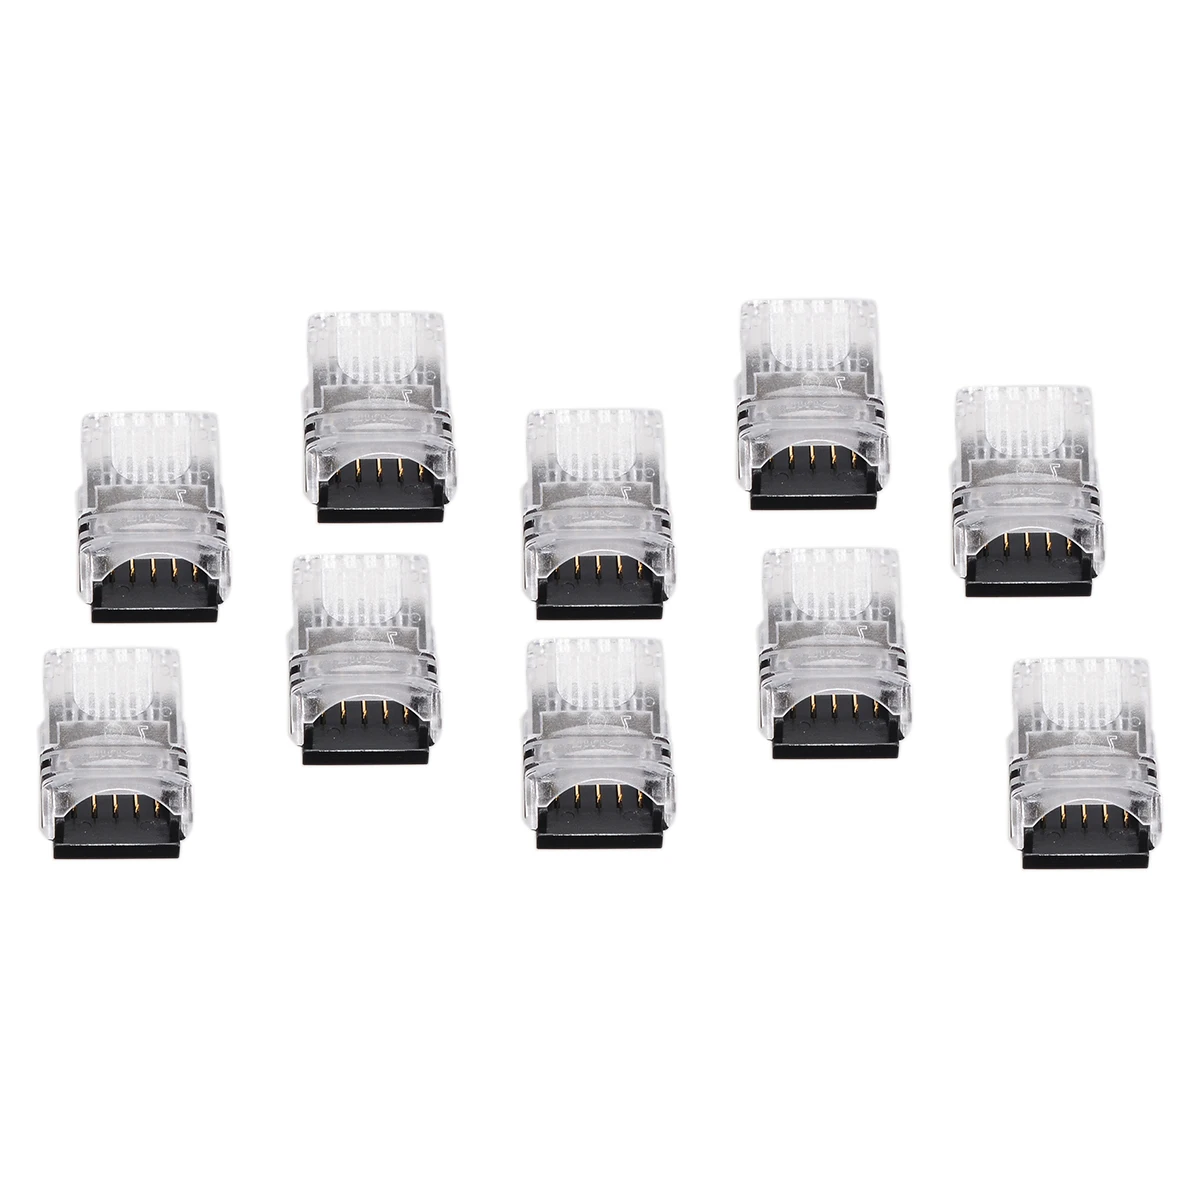 10pcs 5 pin LED Strip Connector Waterproof IP65 5050 LED Light Quick Connectors Mayitr Lighting Accessories